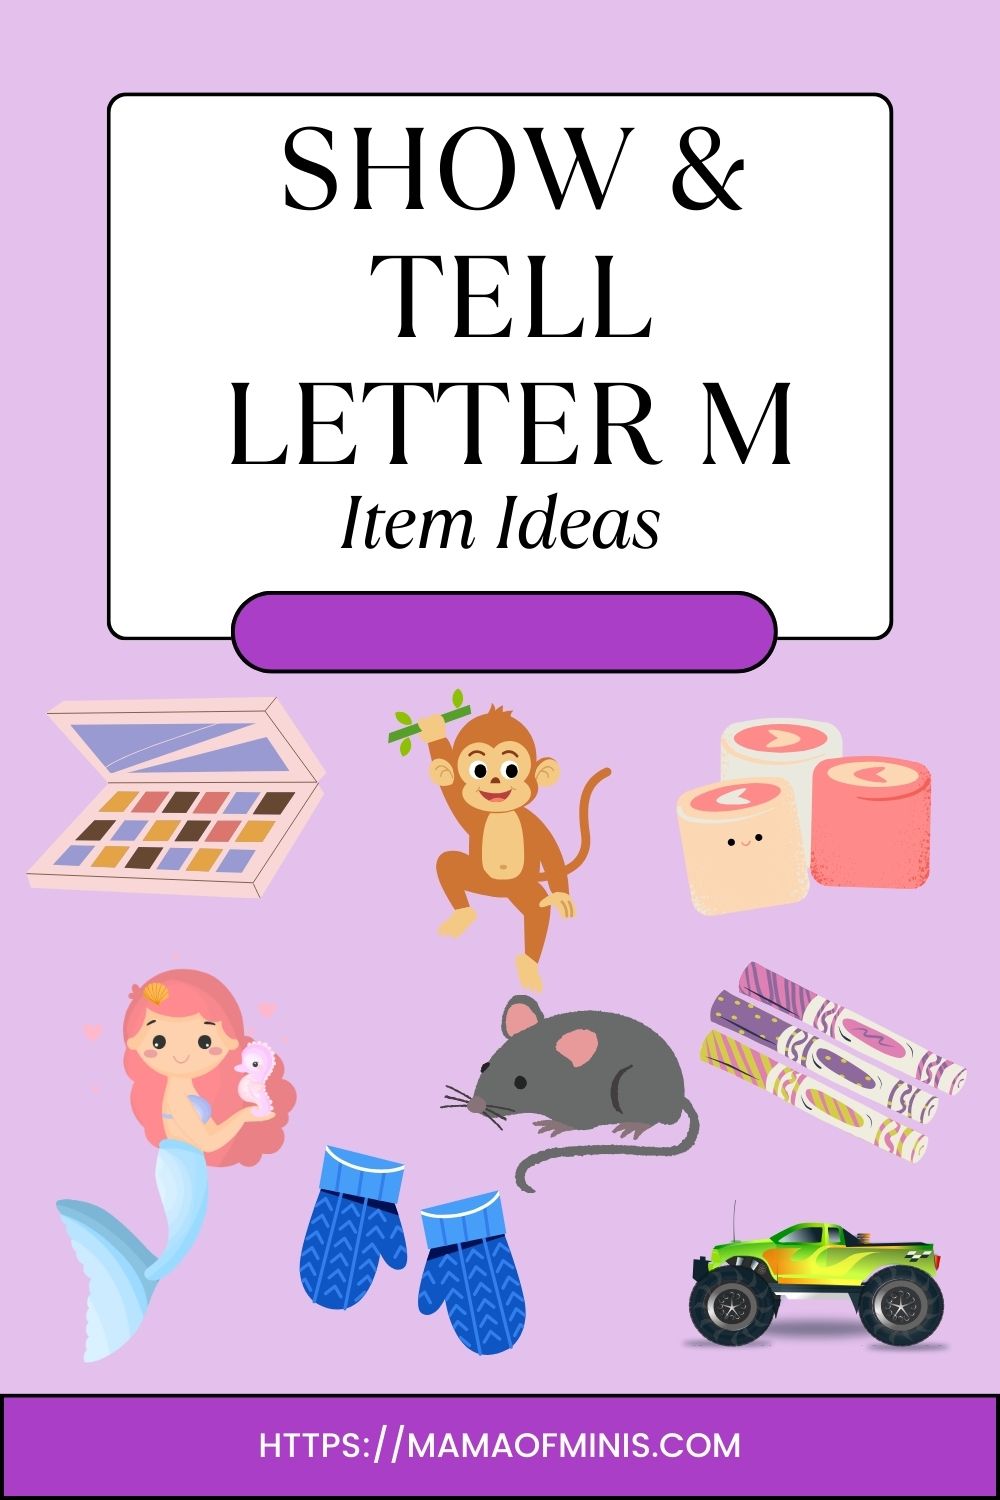 Ideas for Show and Tell Letter M